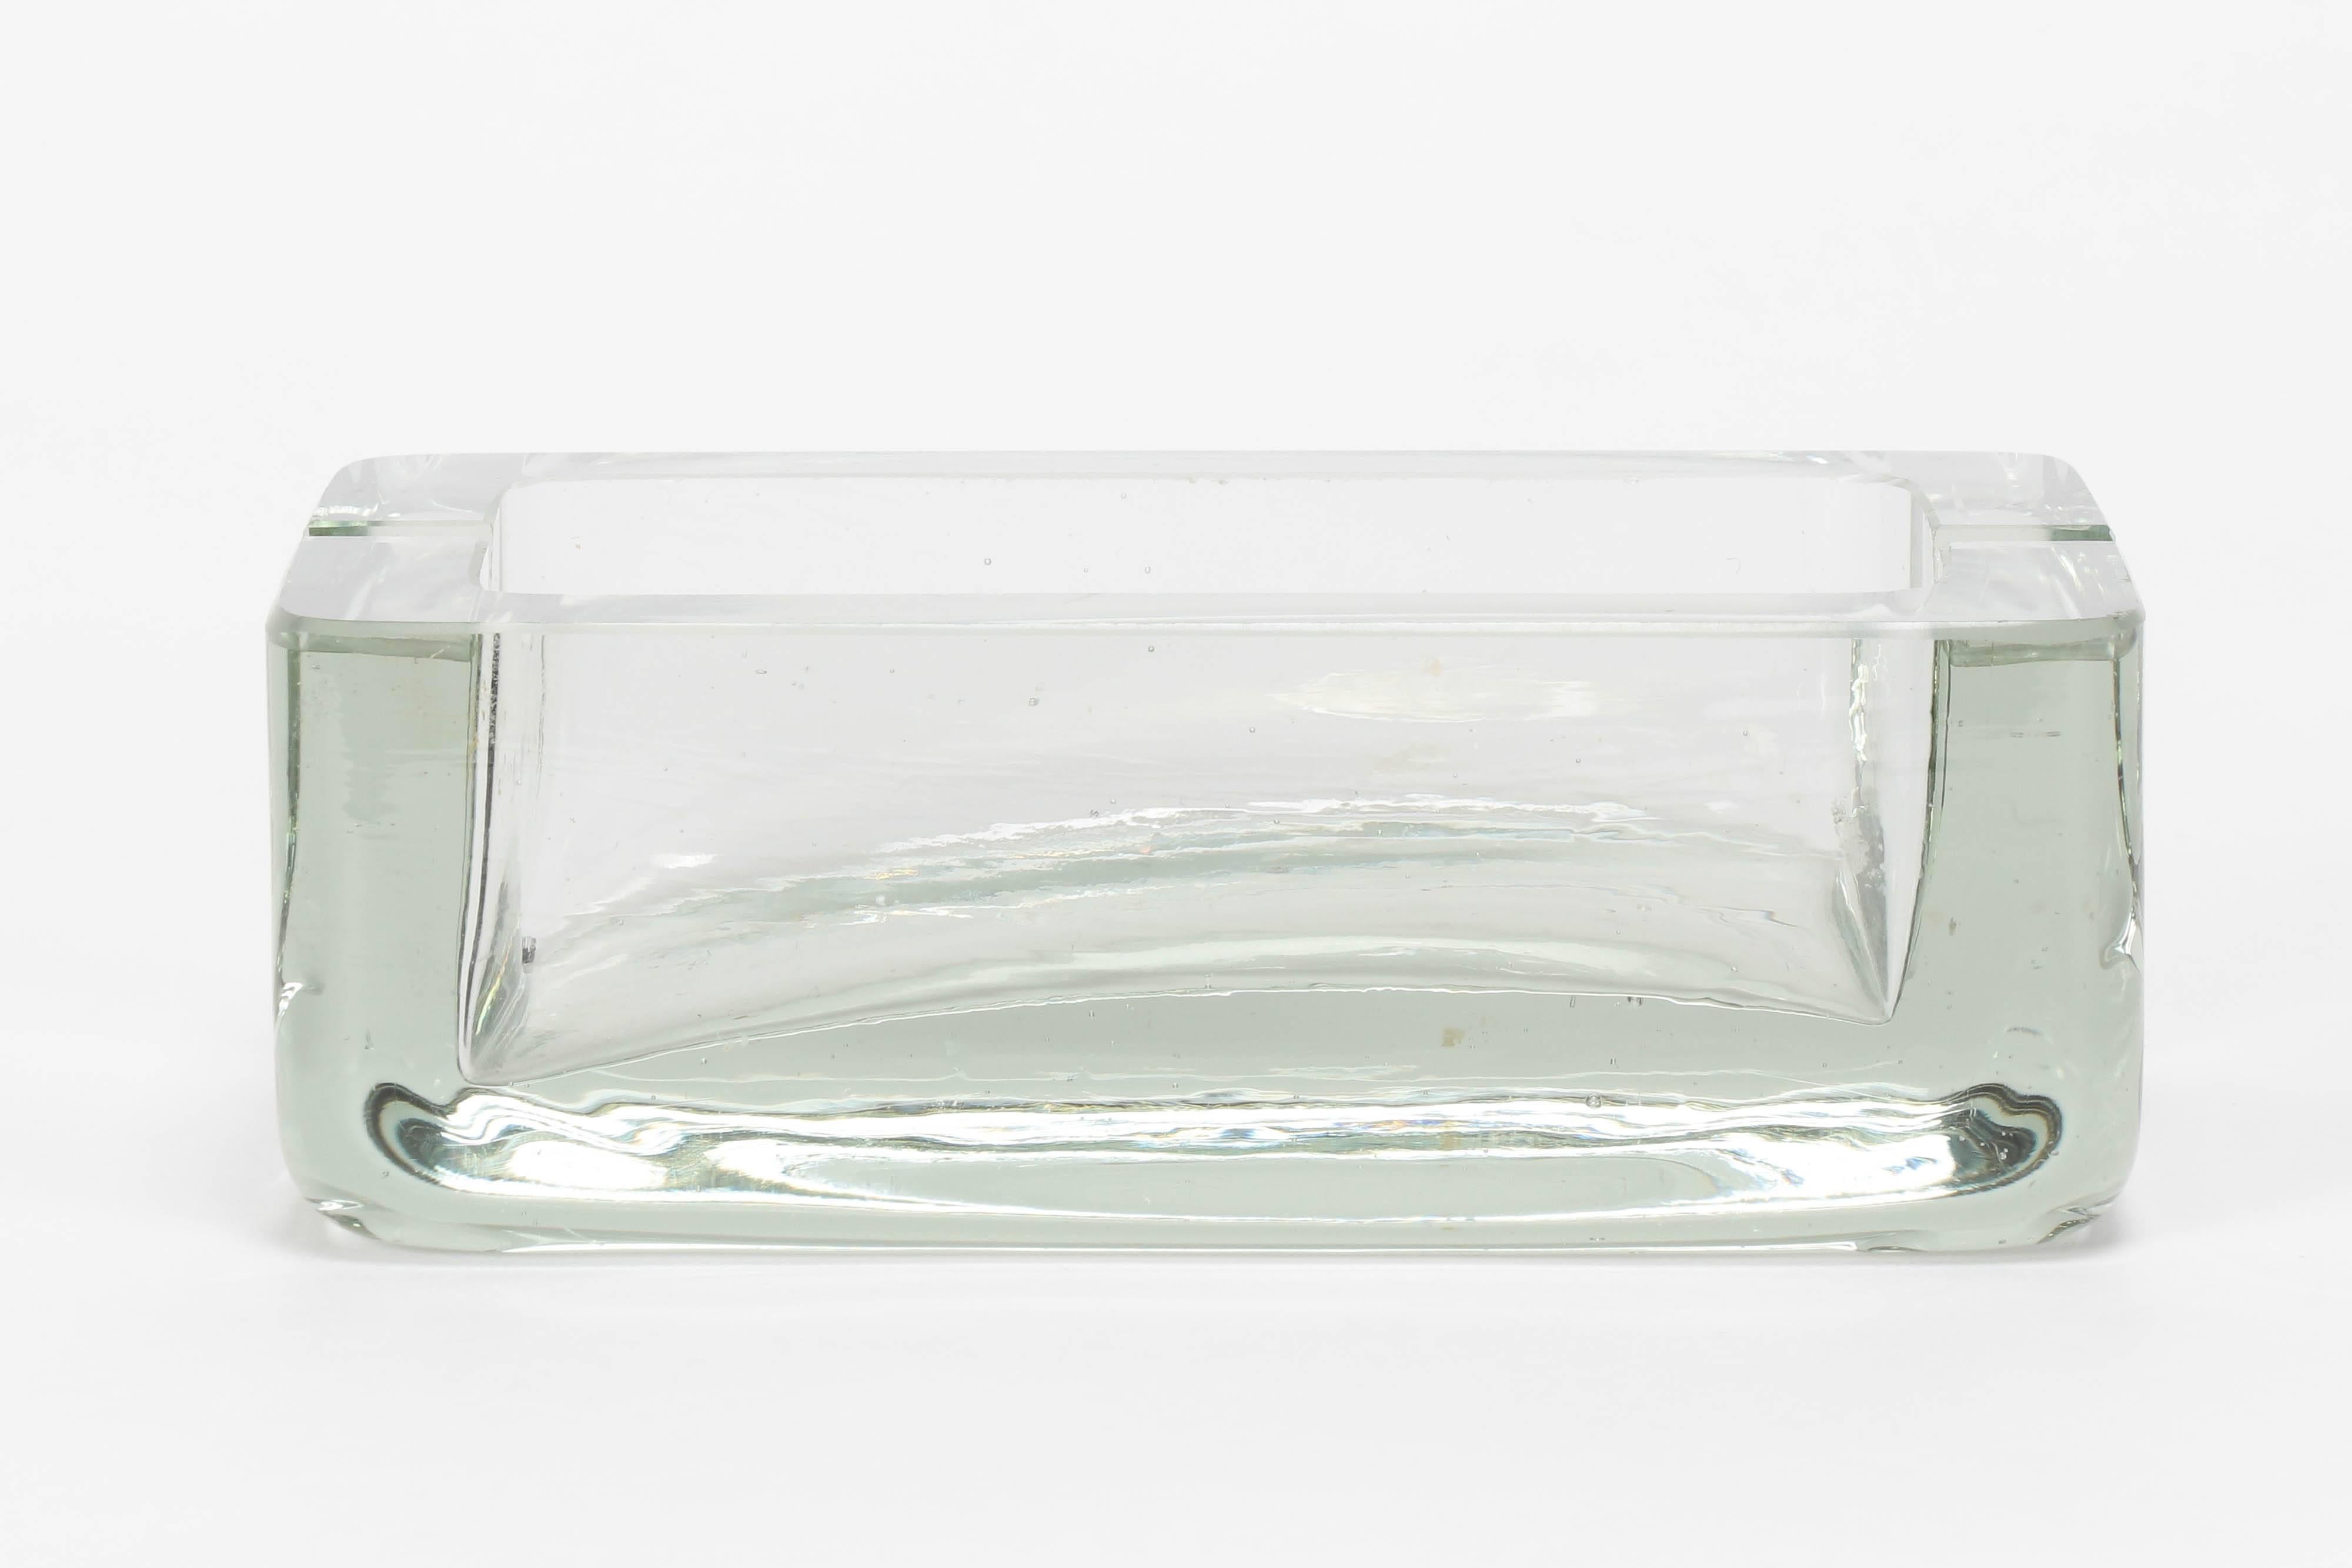 P. Loder ashtray manufactured by Siegwart & Co in Switzerland between 1966 and 1967. Form-blown, then manual sanded. Listed in 